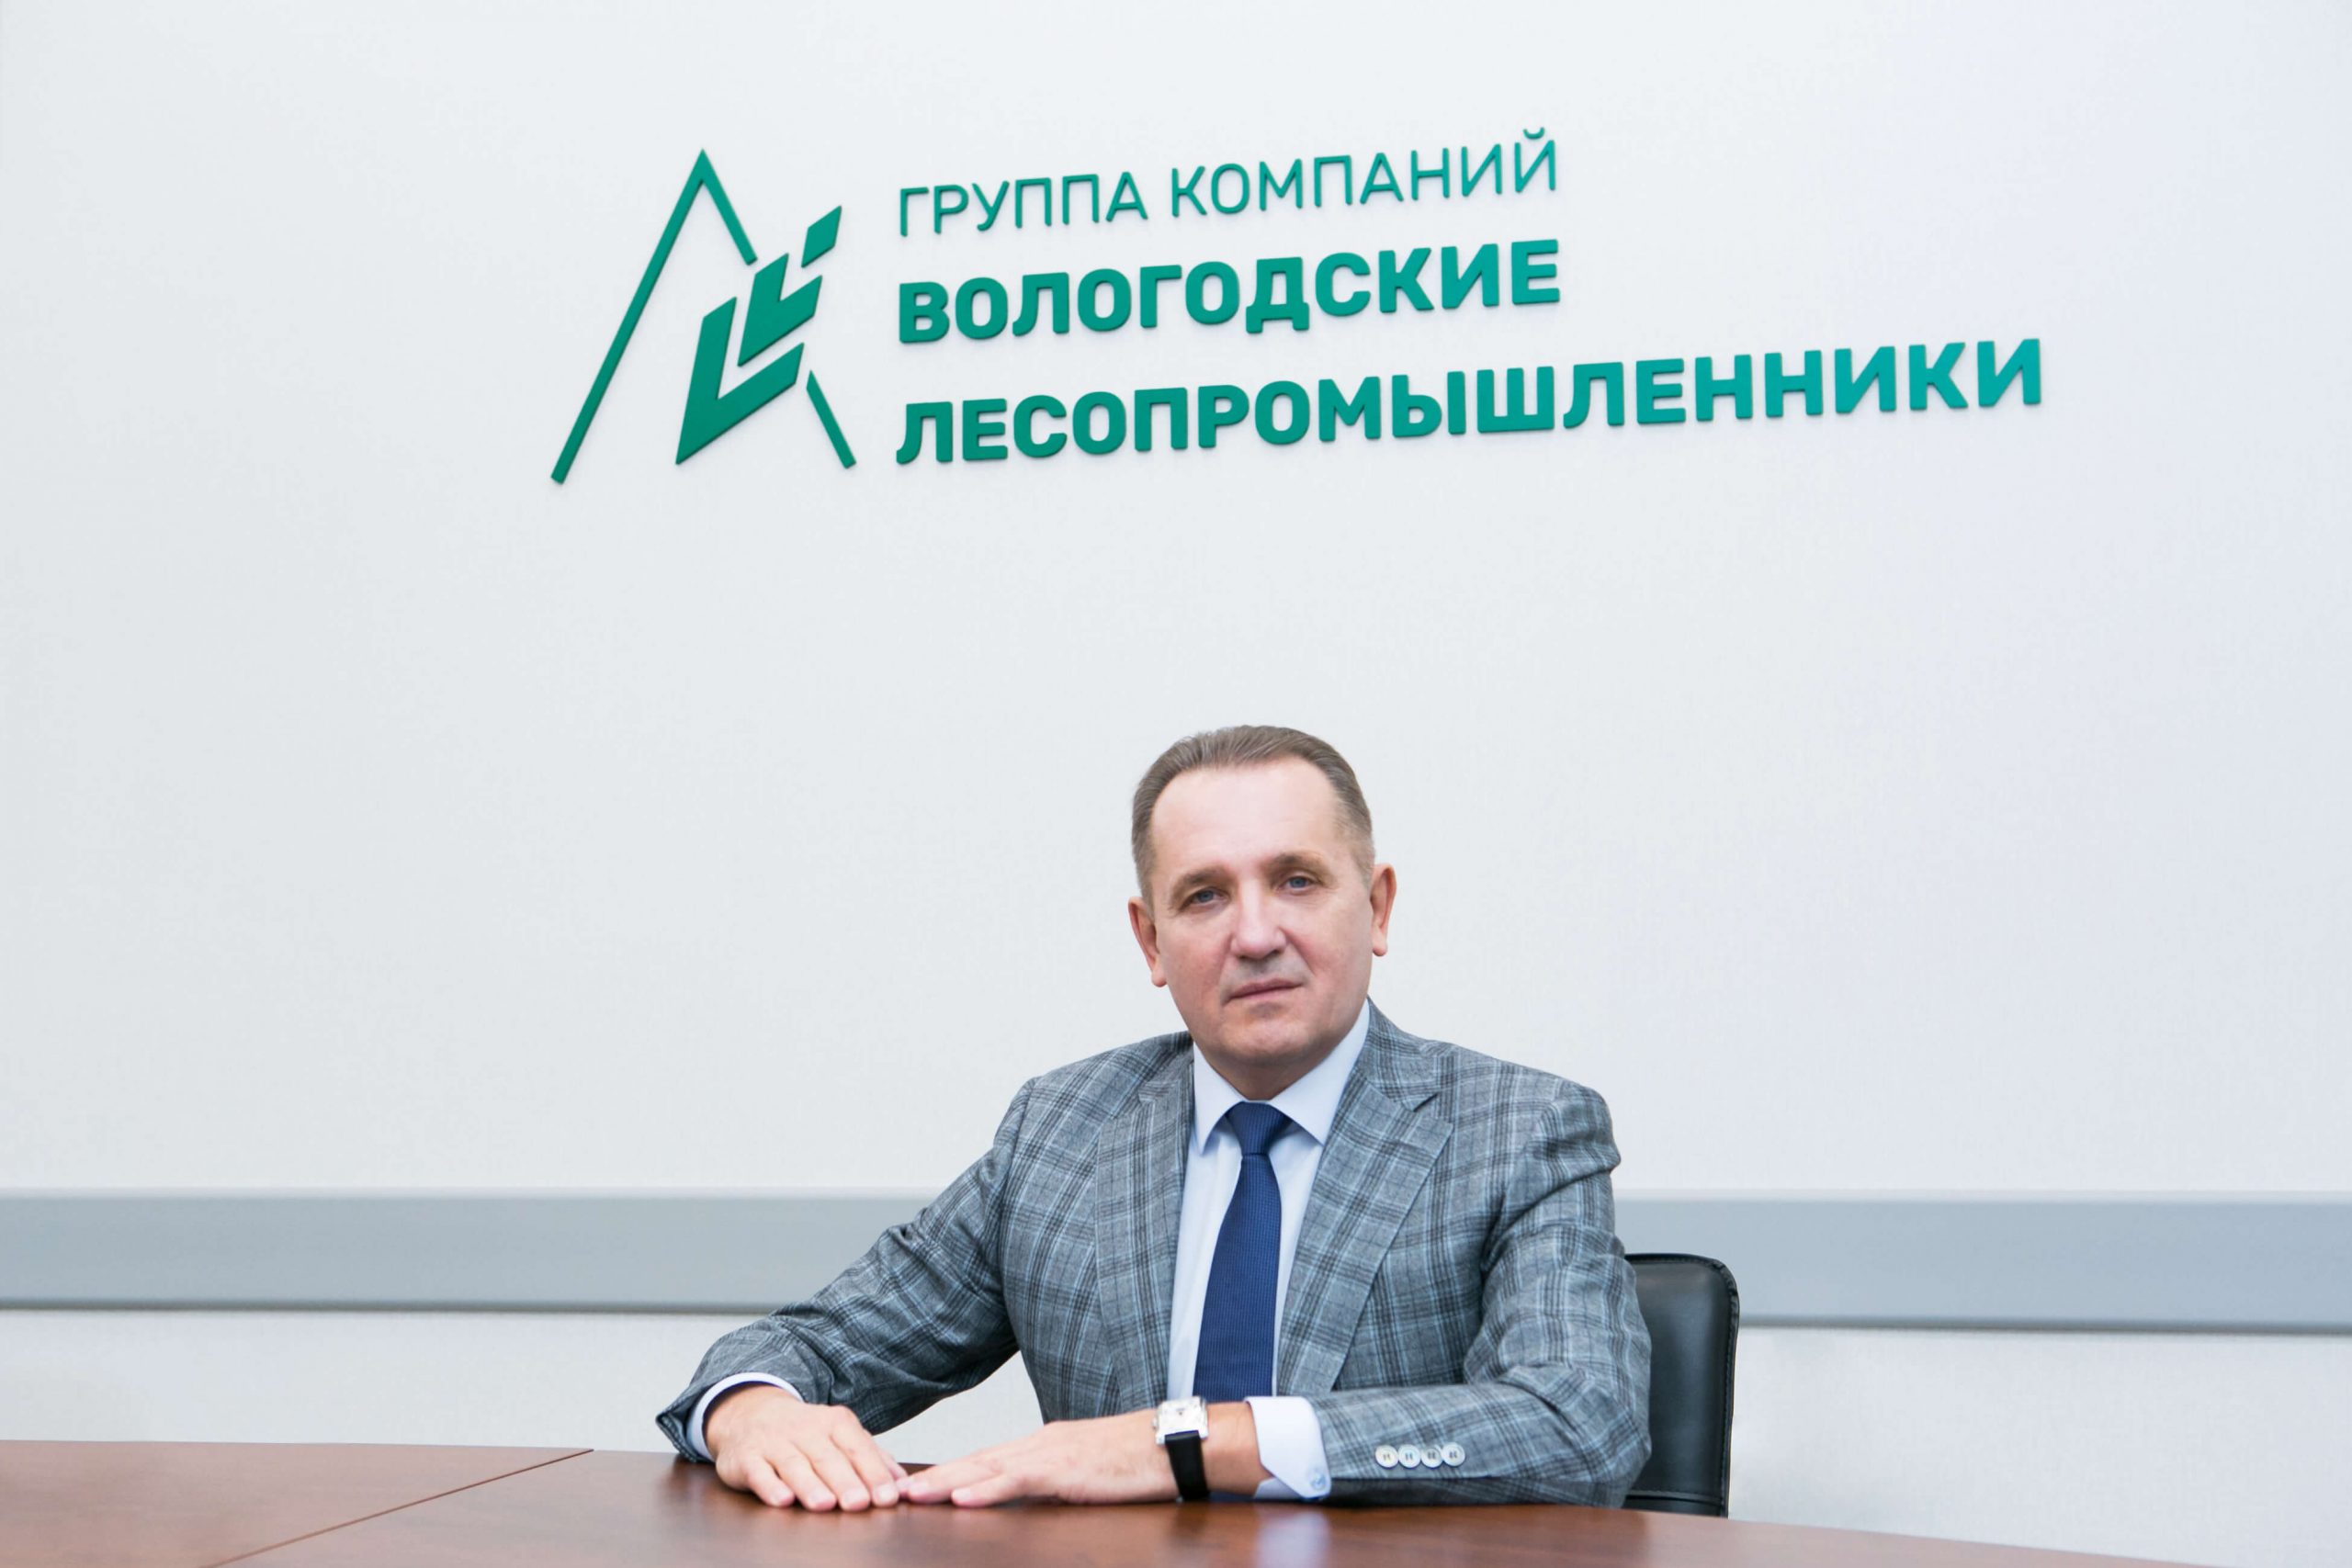 The best company manager of the Vologda Group of Companies has been determined